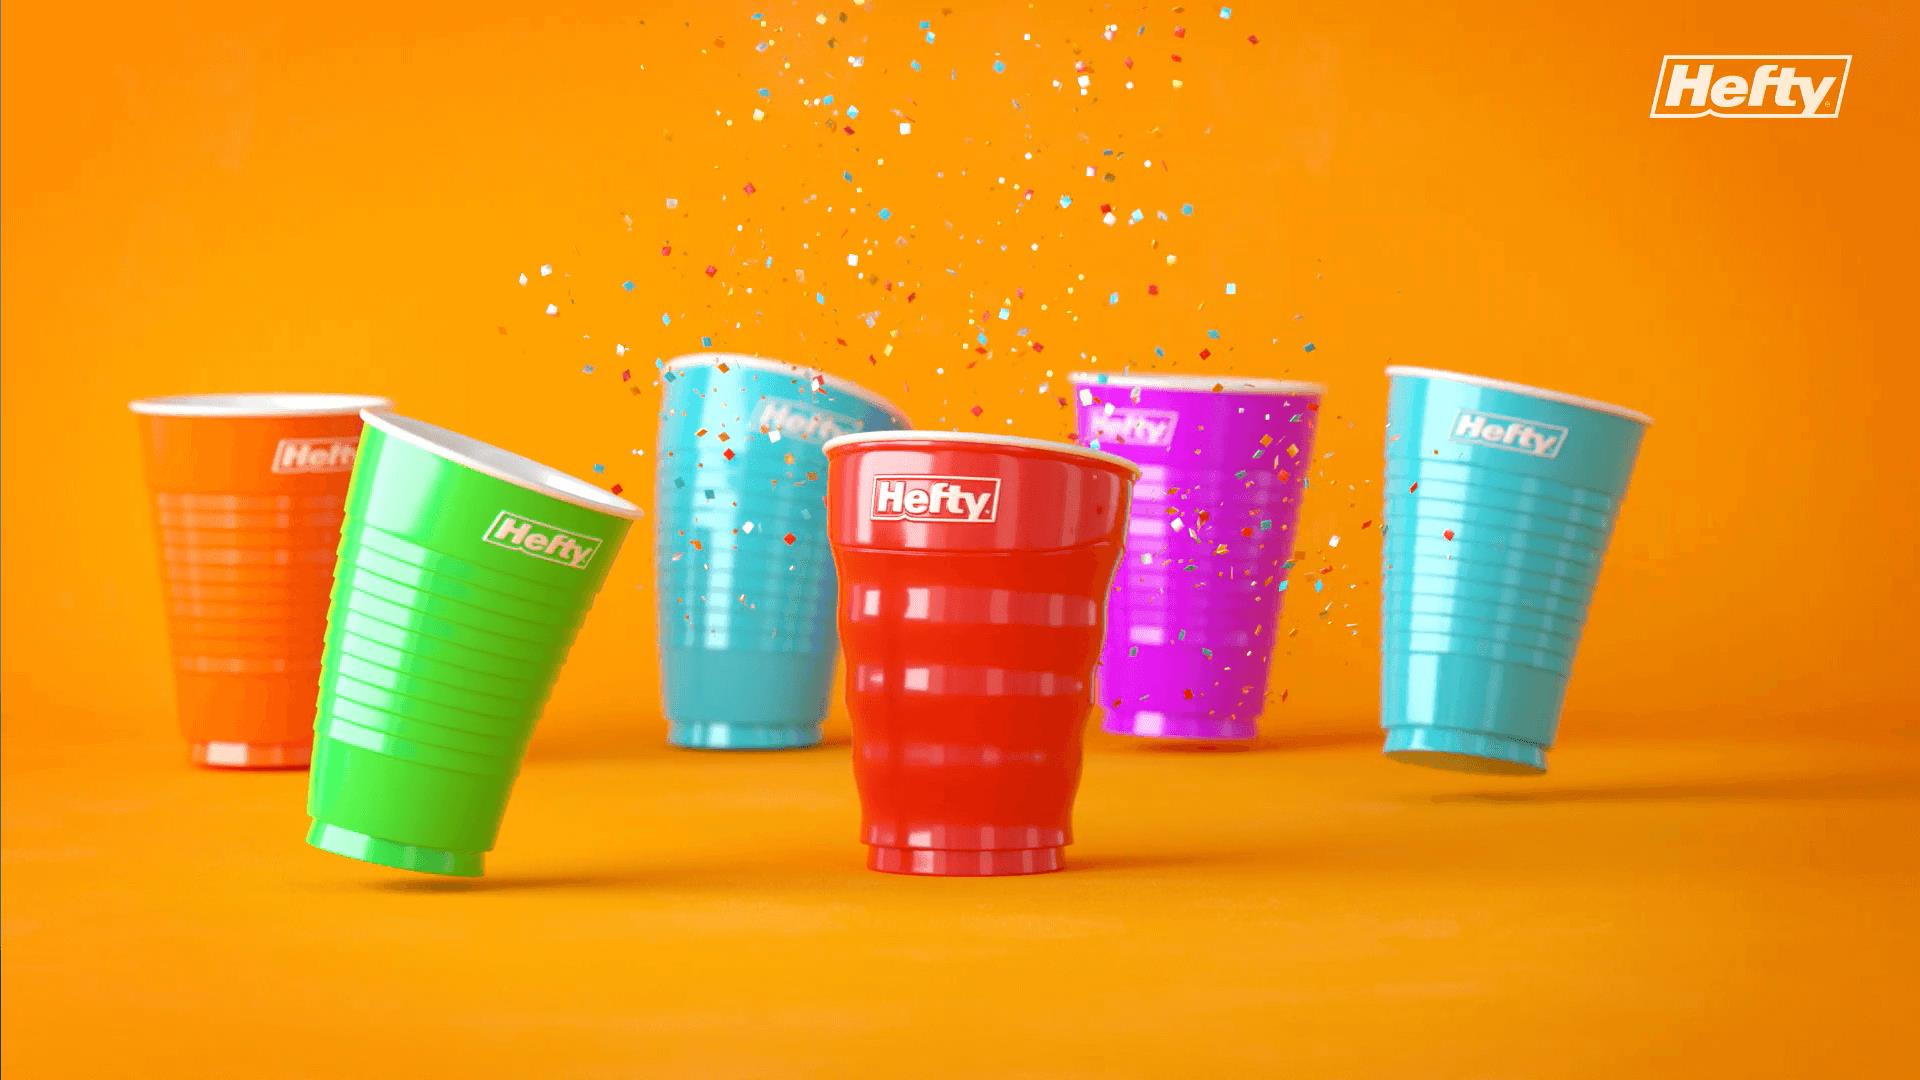 Hefty | Integrated Campaign